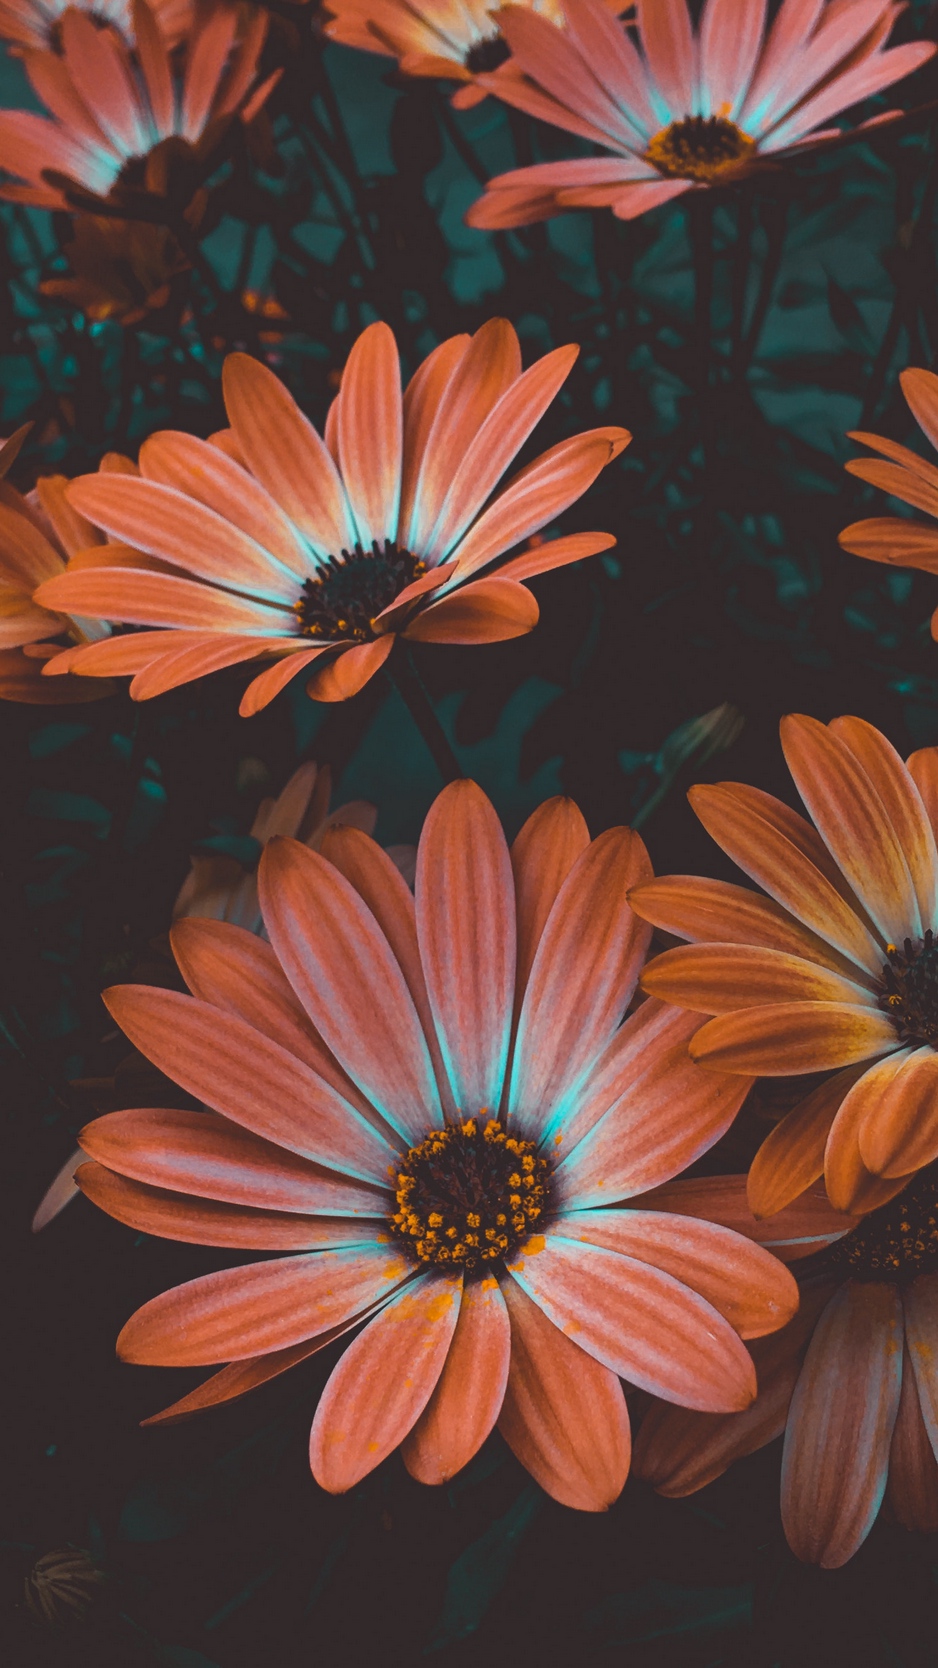 Elizabeth Life Story - African Daisy , HD Wallpaper & Backgrounds